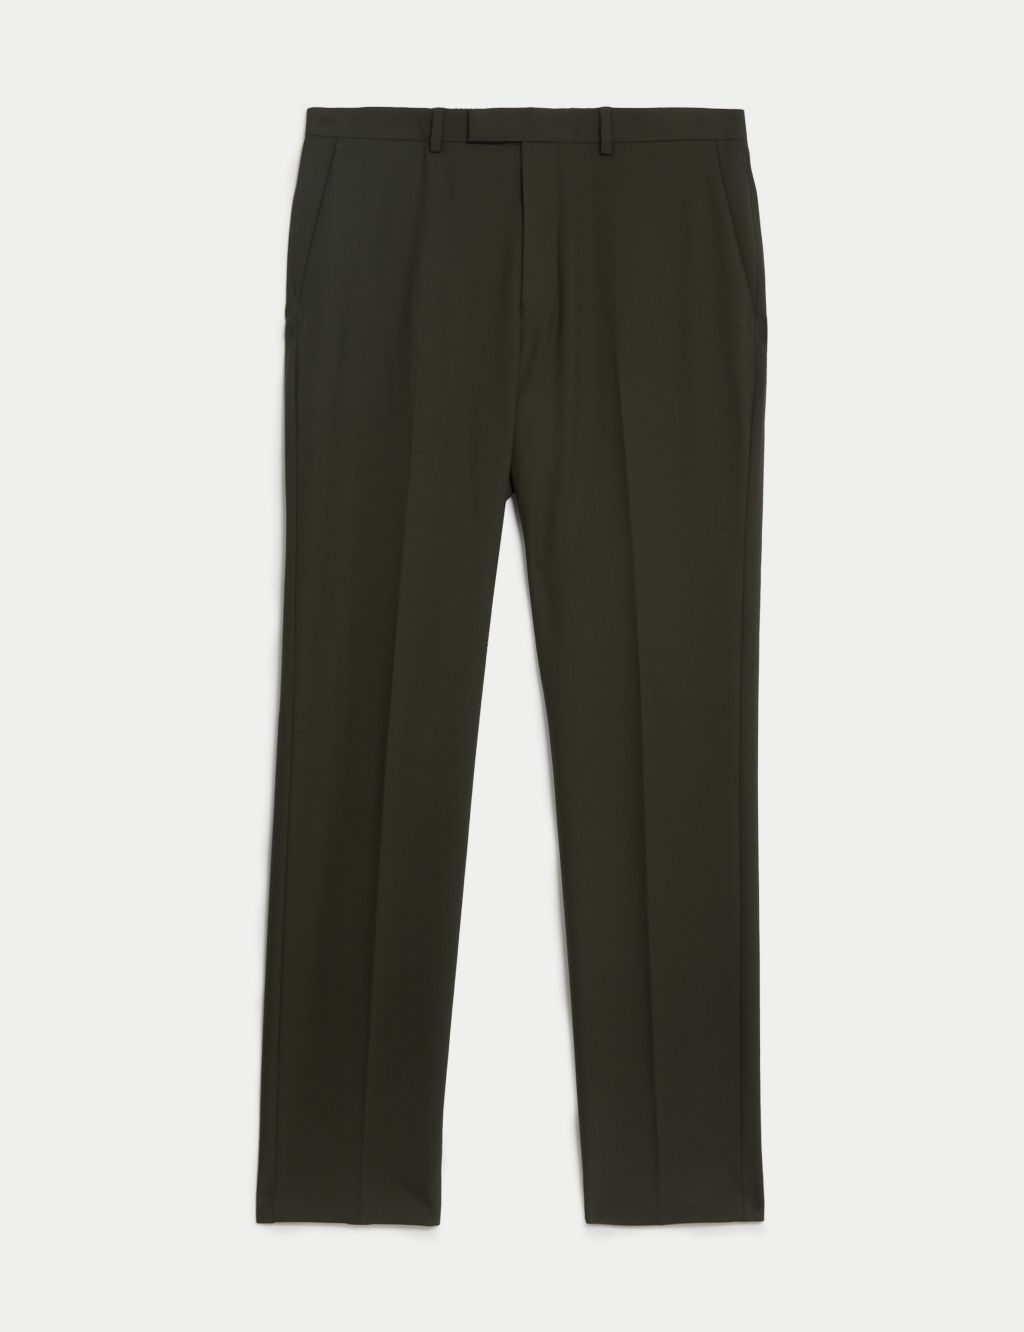 Slim Fit Stretch Suit Trousers image 2